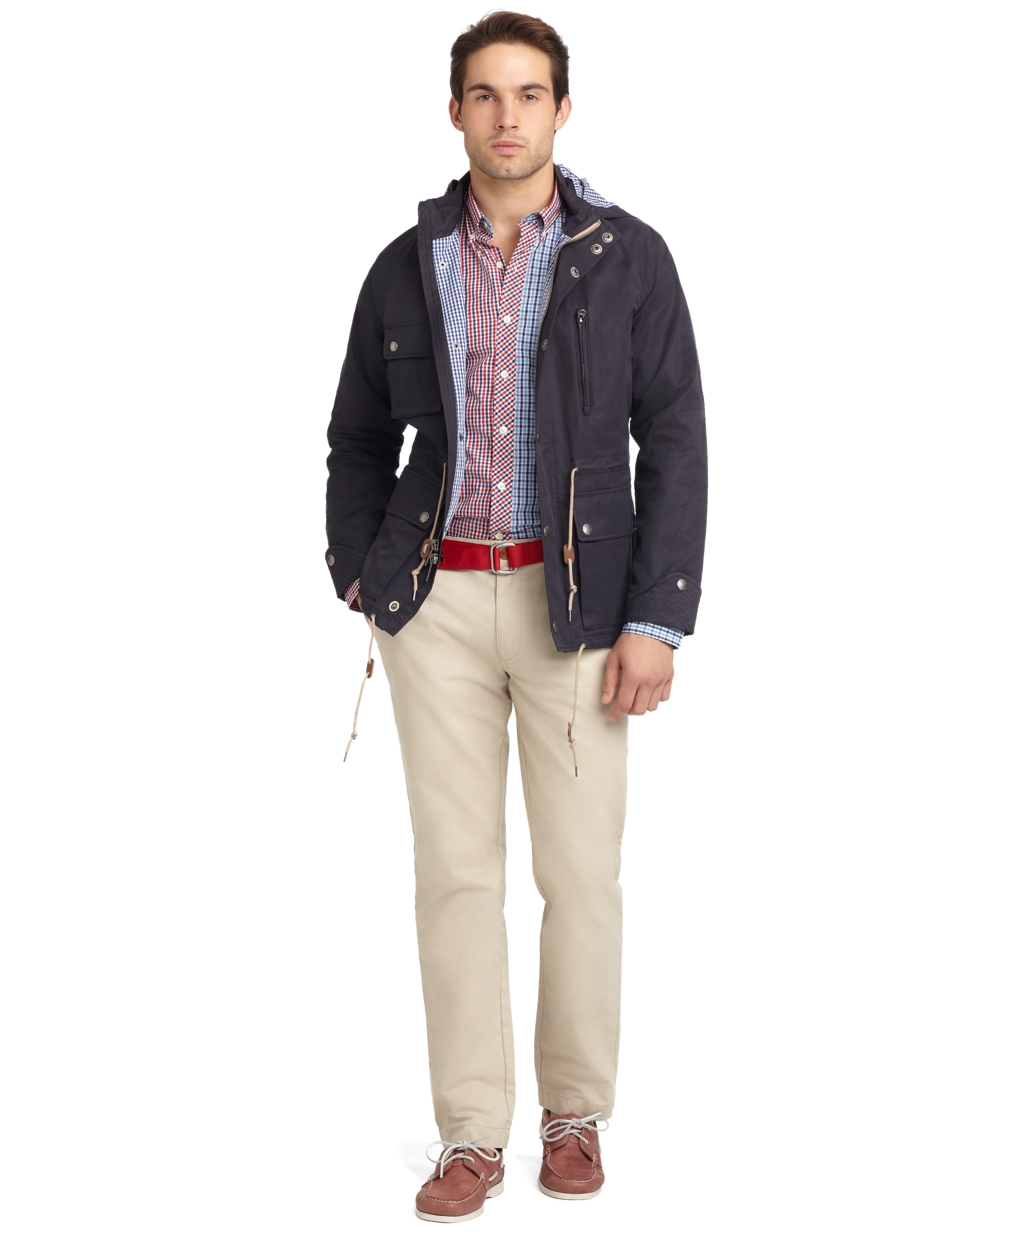 Lyst - Brooks Brothers Casual Parka in Gray for Men